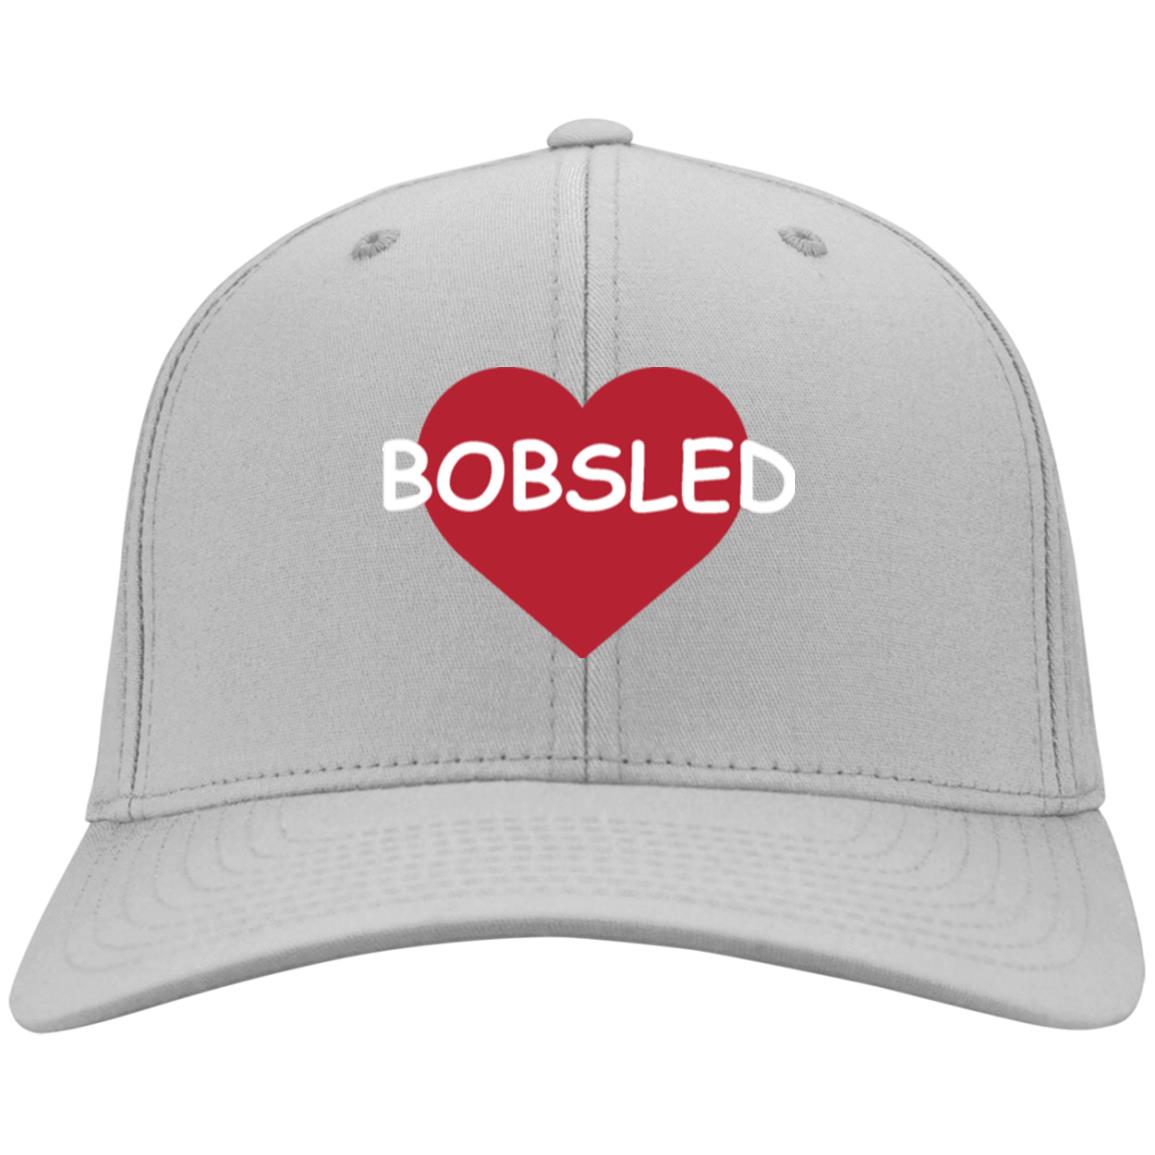 Bobsled Sport Hat